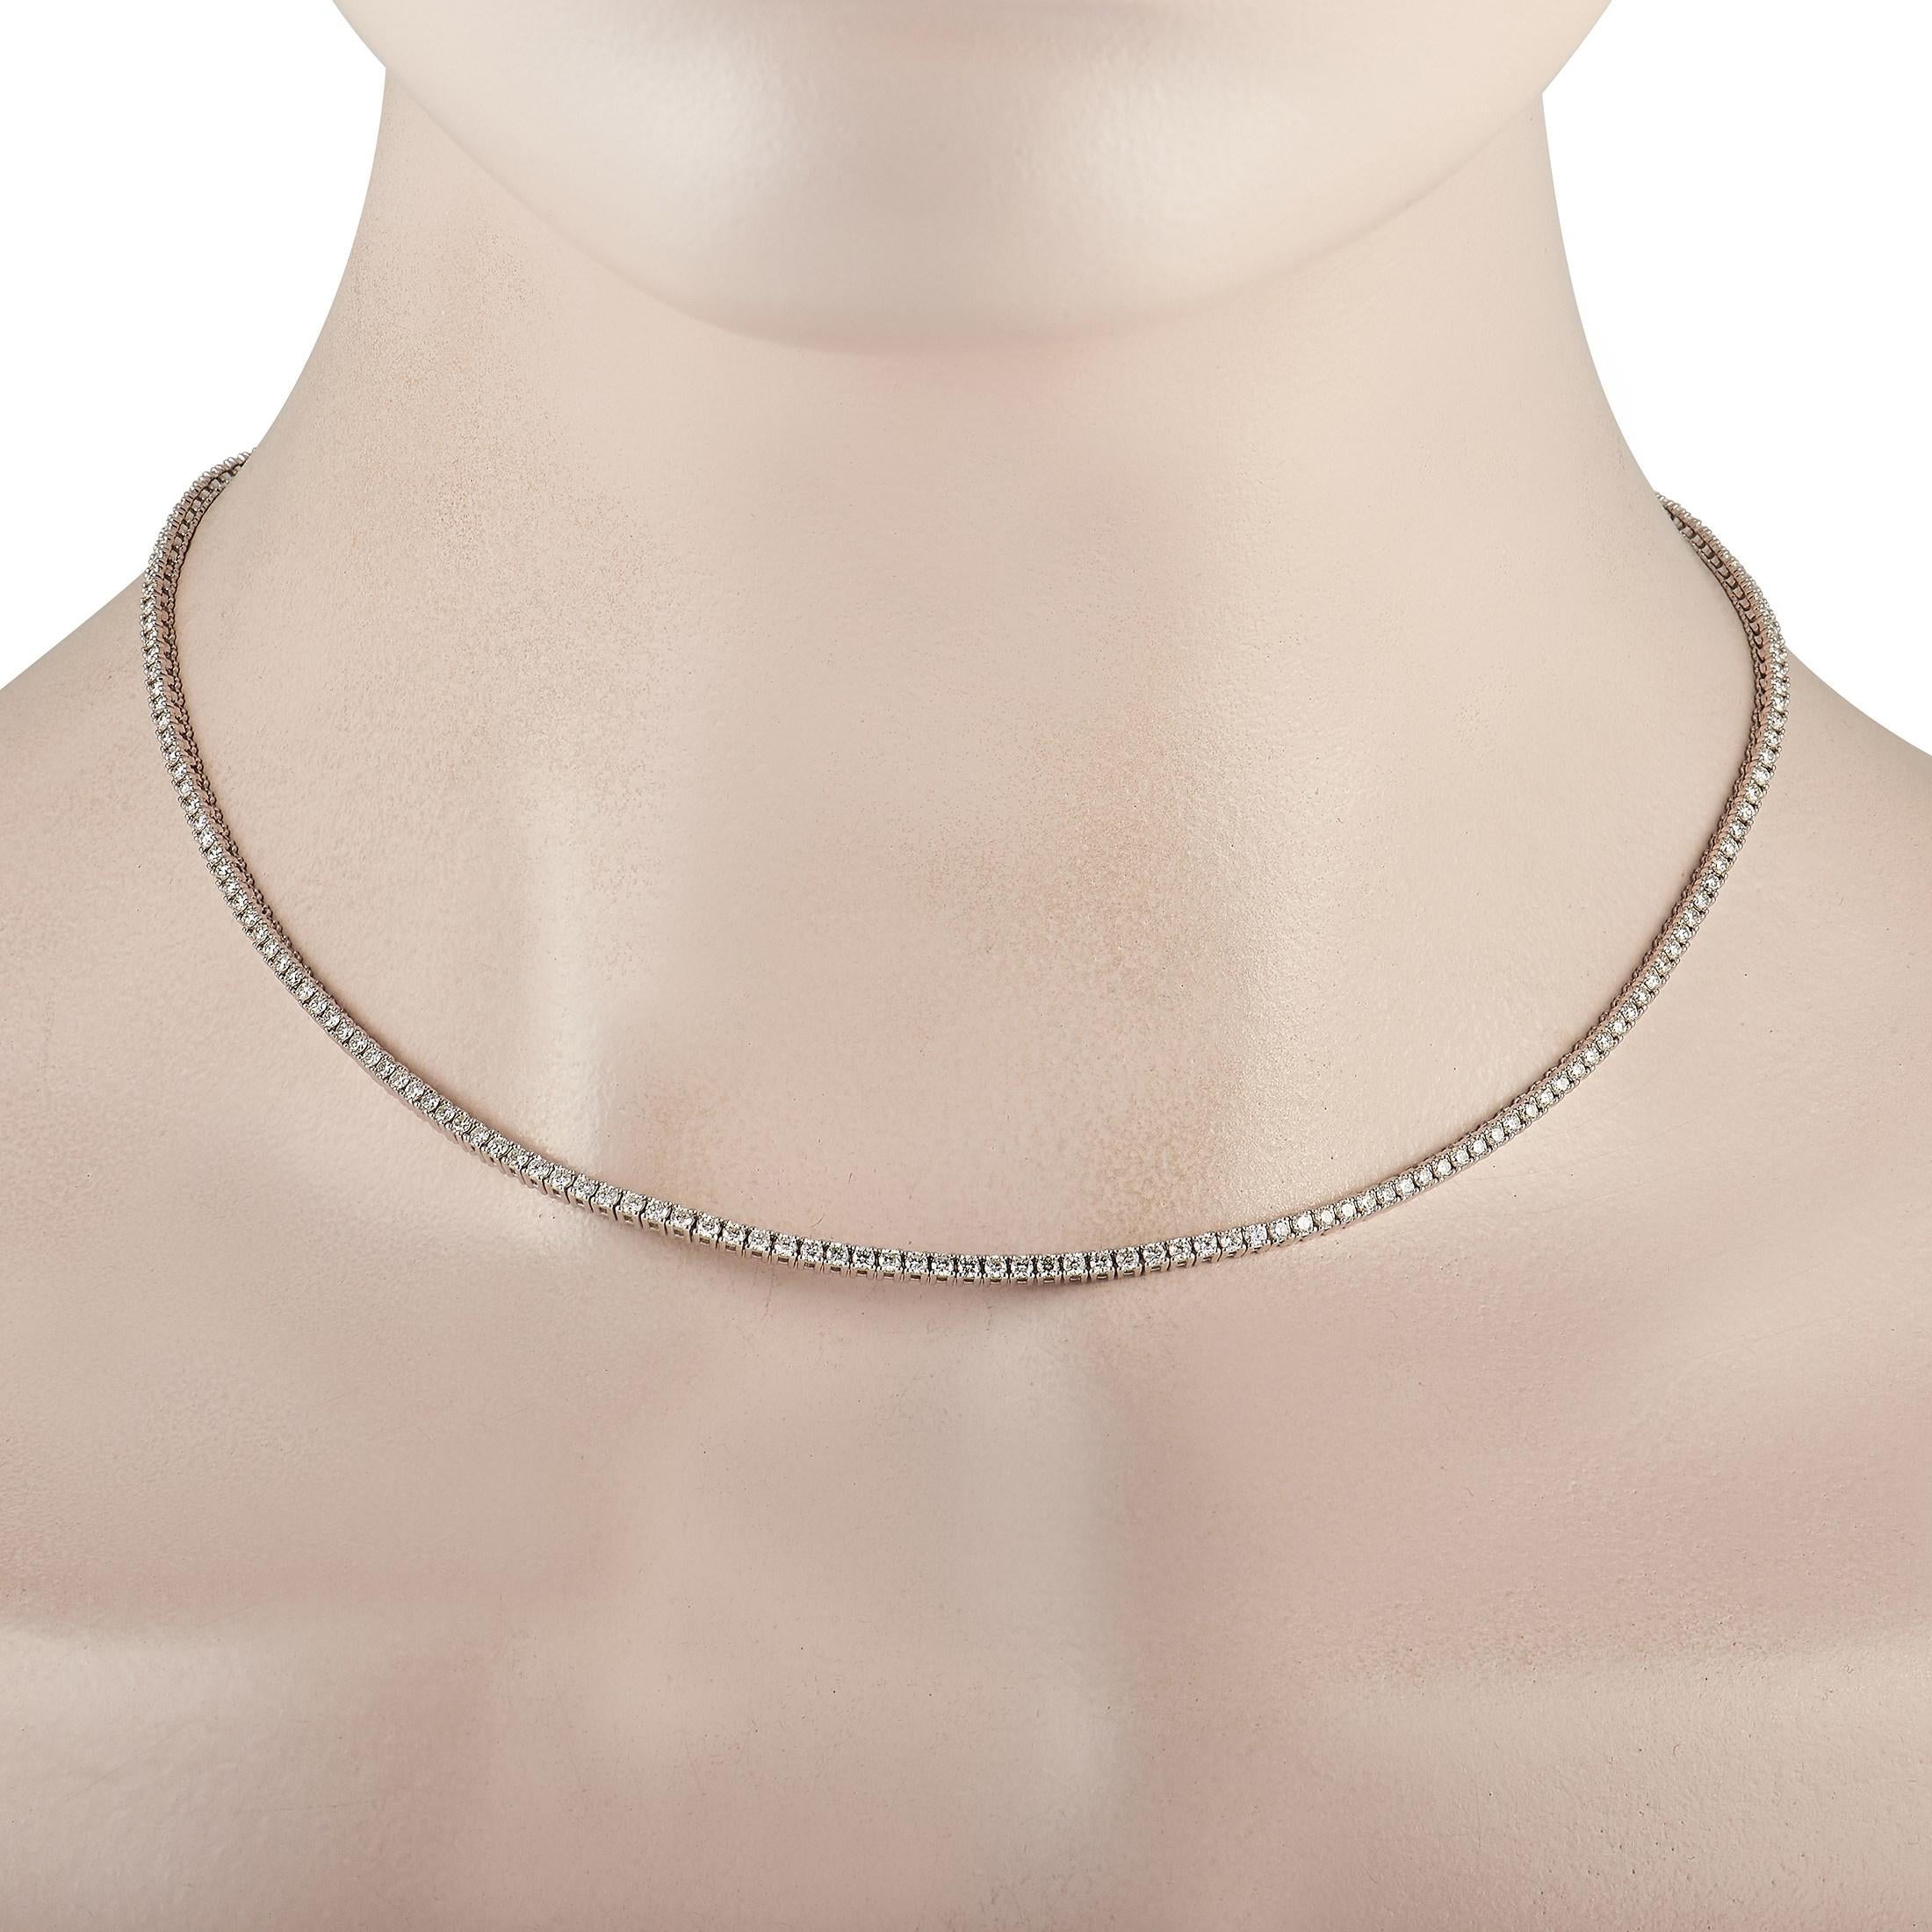 Round-cut diamonds totaling 4.36 carats allow this sleek, sophisticated necklace to effortlessly catch the light. A versatile piece that will elevate any ensemble, it features a minimalist setting made from 18K White Gold and measures 17.5” long.